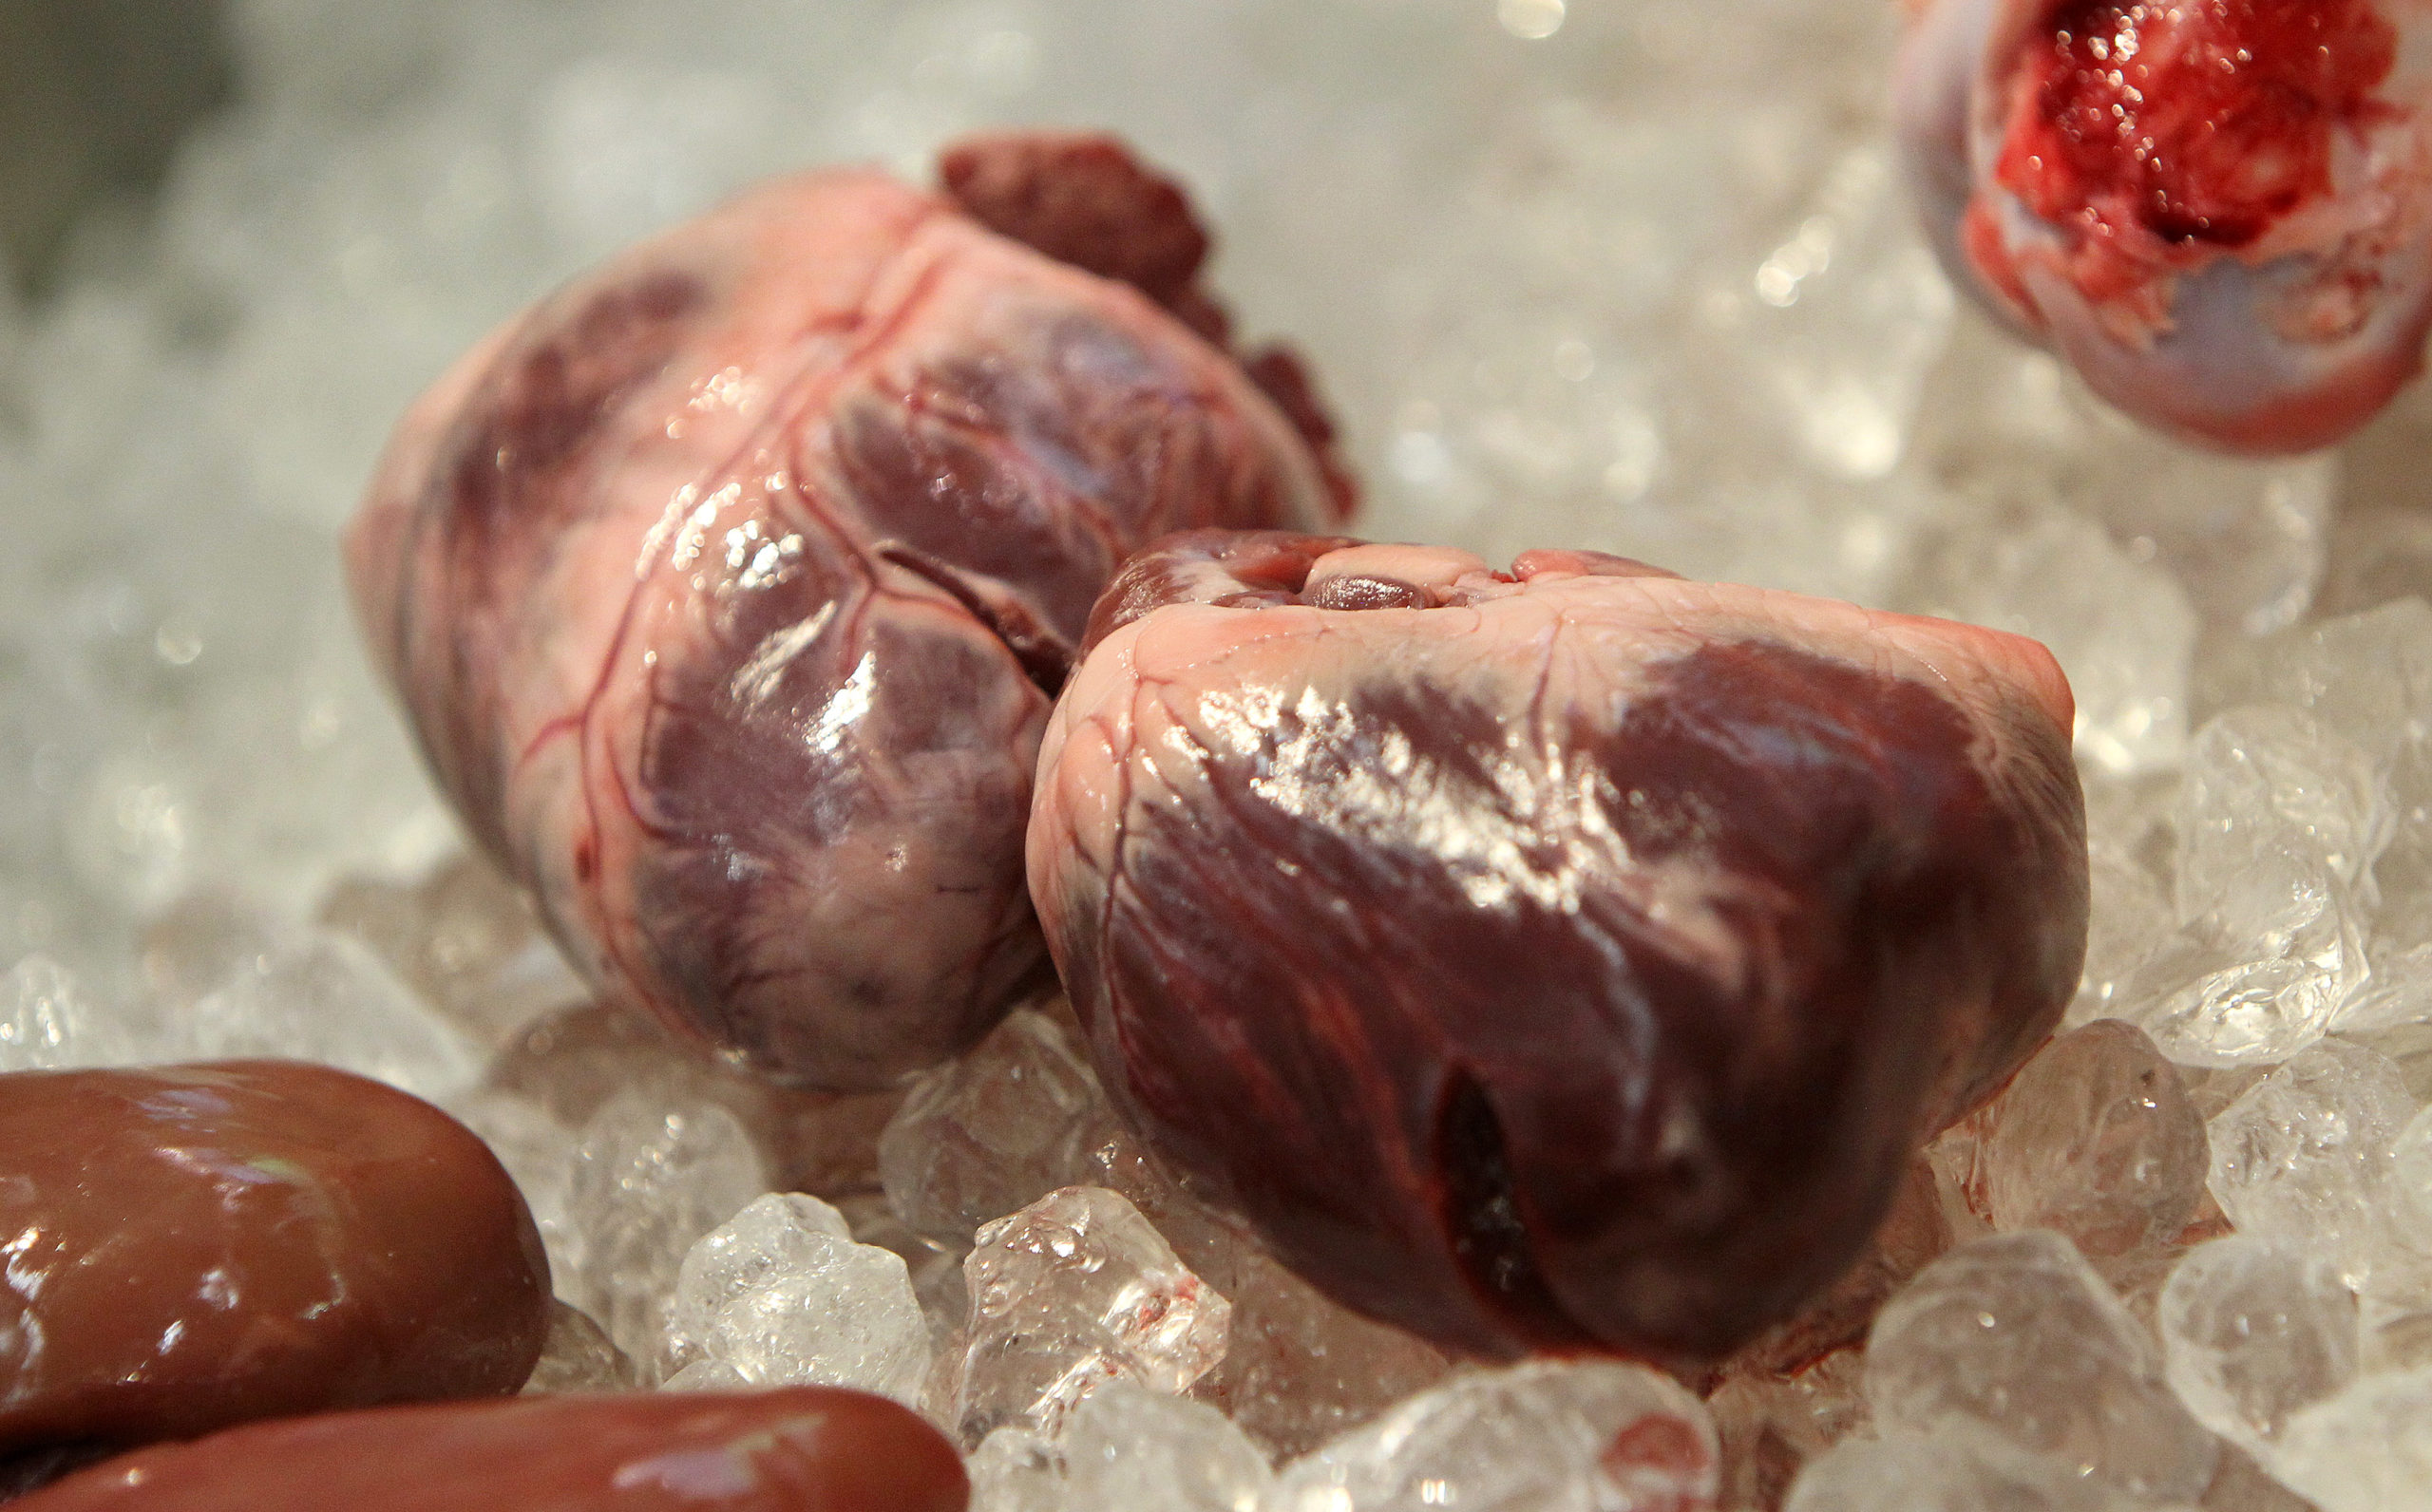 Pig hearts are pictured at the international meat industry fair IFFA in Frankfurt am Main, western Germany, on May 6, 2019. - Young butchers gathered in Frankfurt for an international contest are open to updating their trade, but have yet to be won over by "strange" meat substitutes gaining footholds in the market. (Photo by Daniel ROLAND / AFP) (Photo credit should read DANIEL ROLAND/AFP via Getty Images)